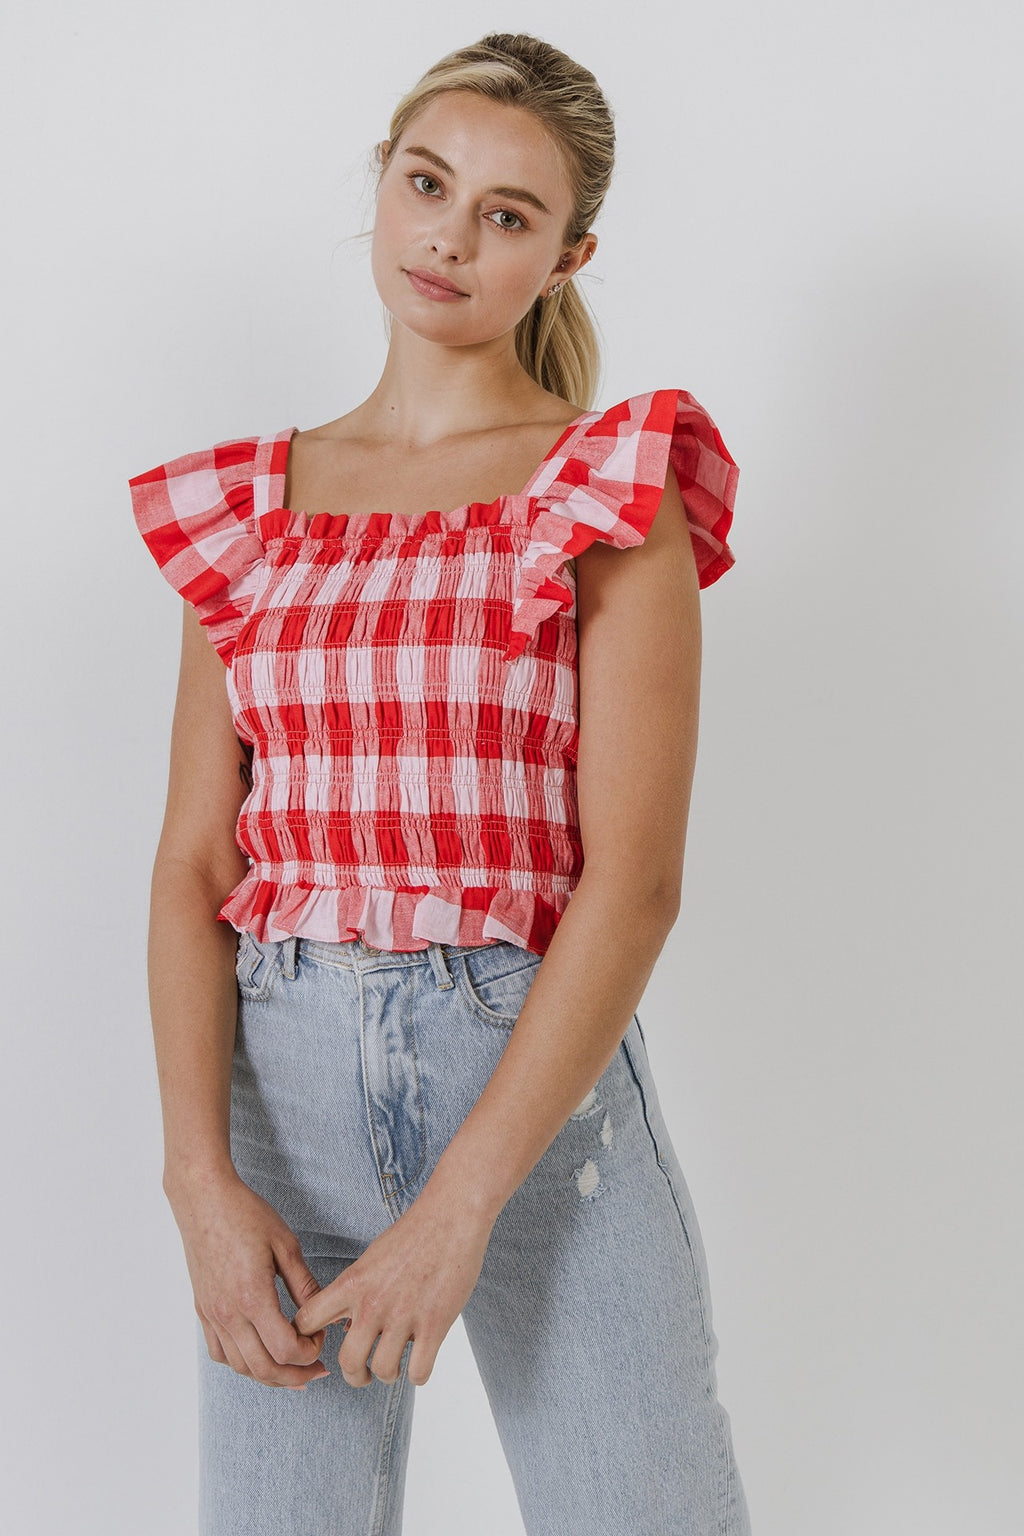 Gingham Red Pink Top